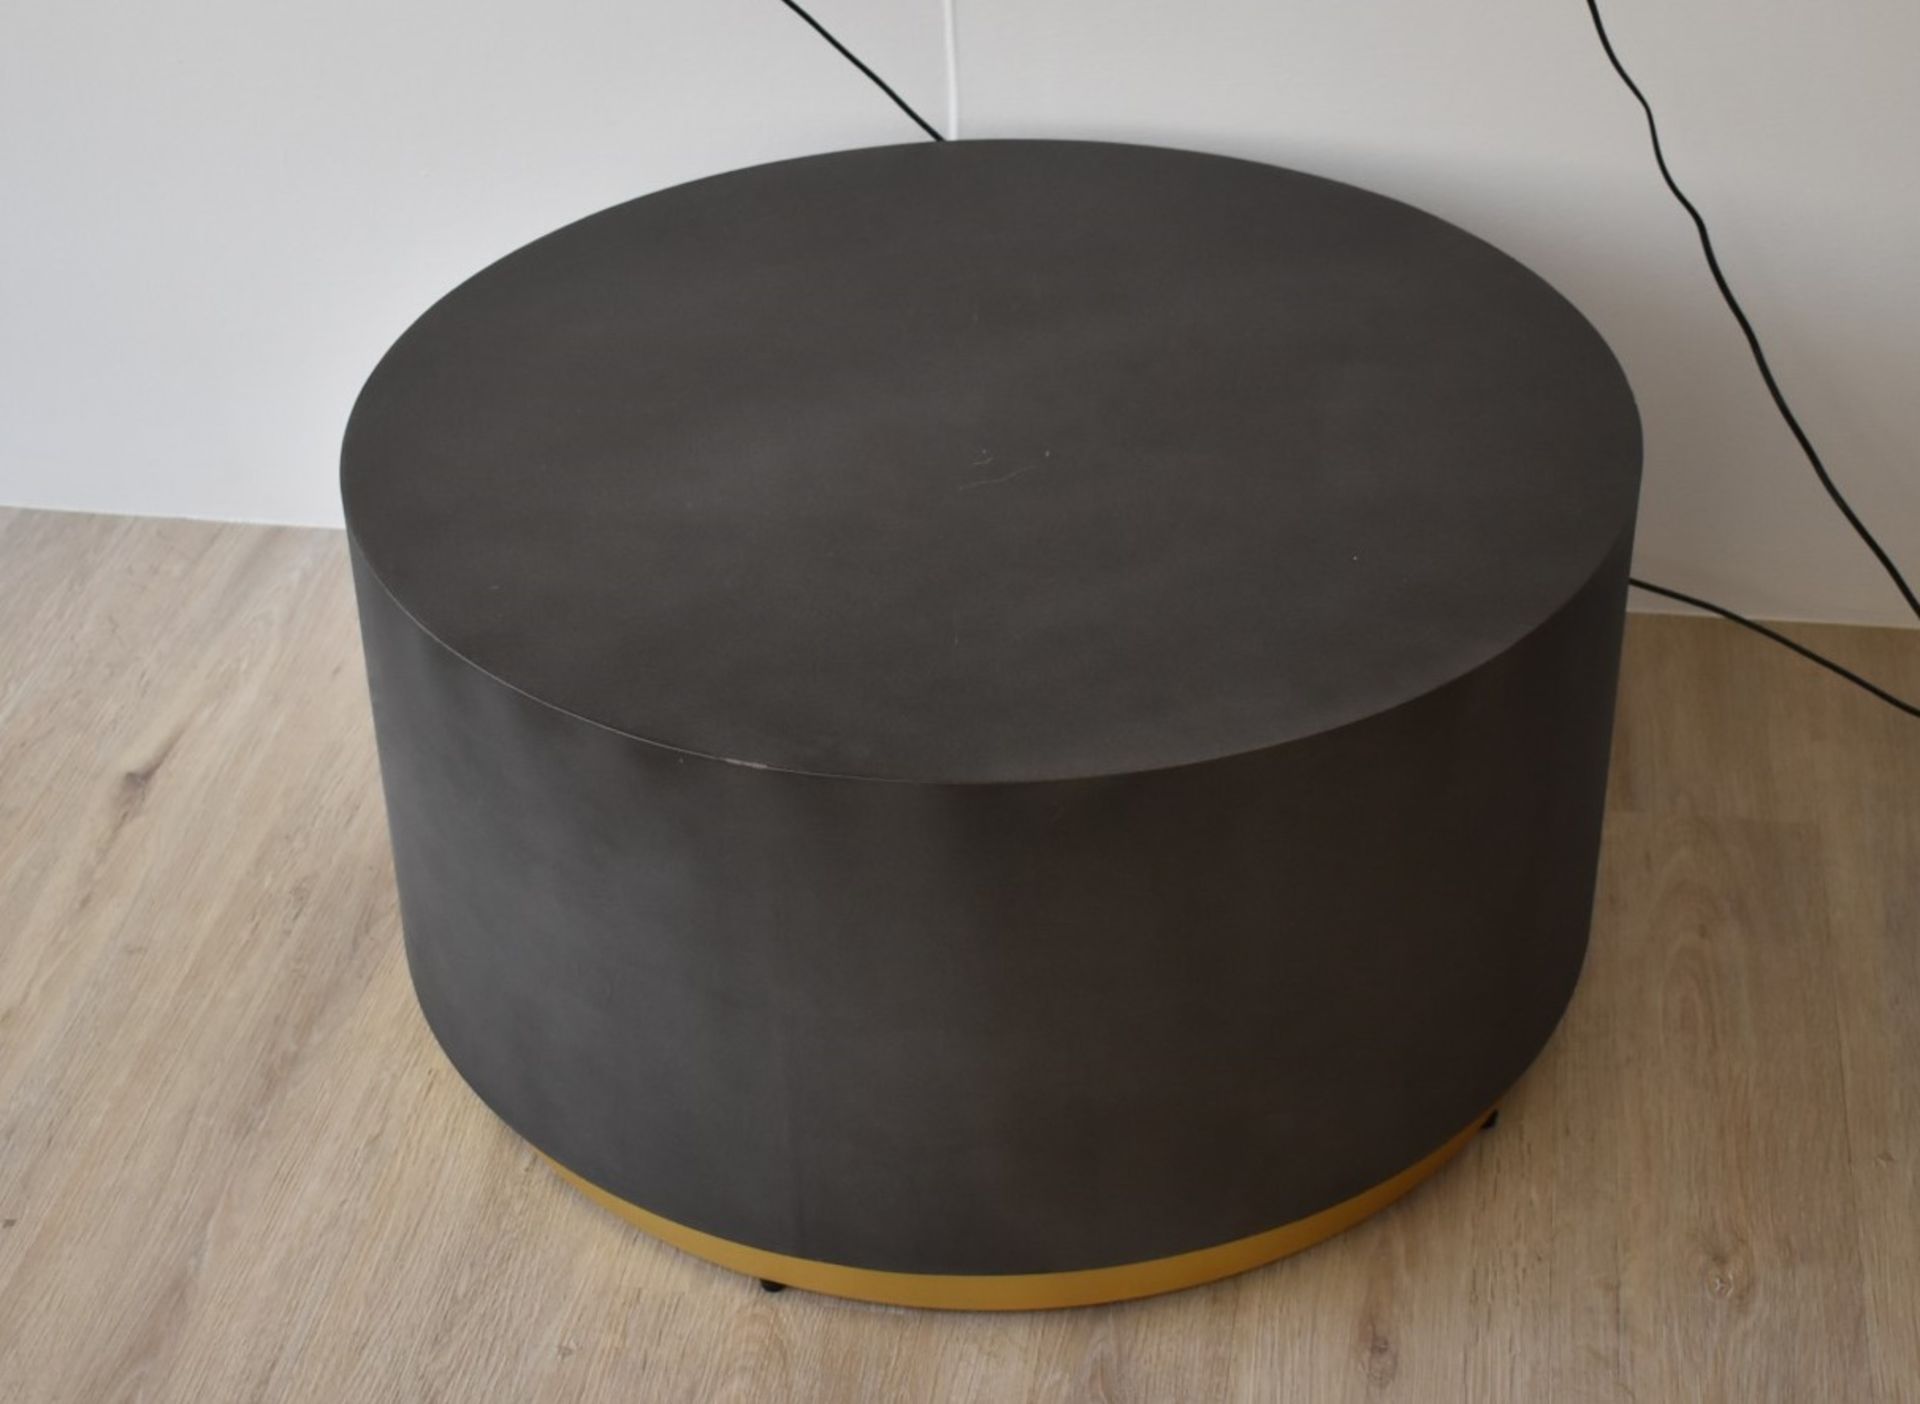 1 x Round Coffee Table With Concrete Effect Finish and Gold Base - RRP £455 - NO VAT ON THE HAMMER! - Image 7 of 7